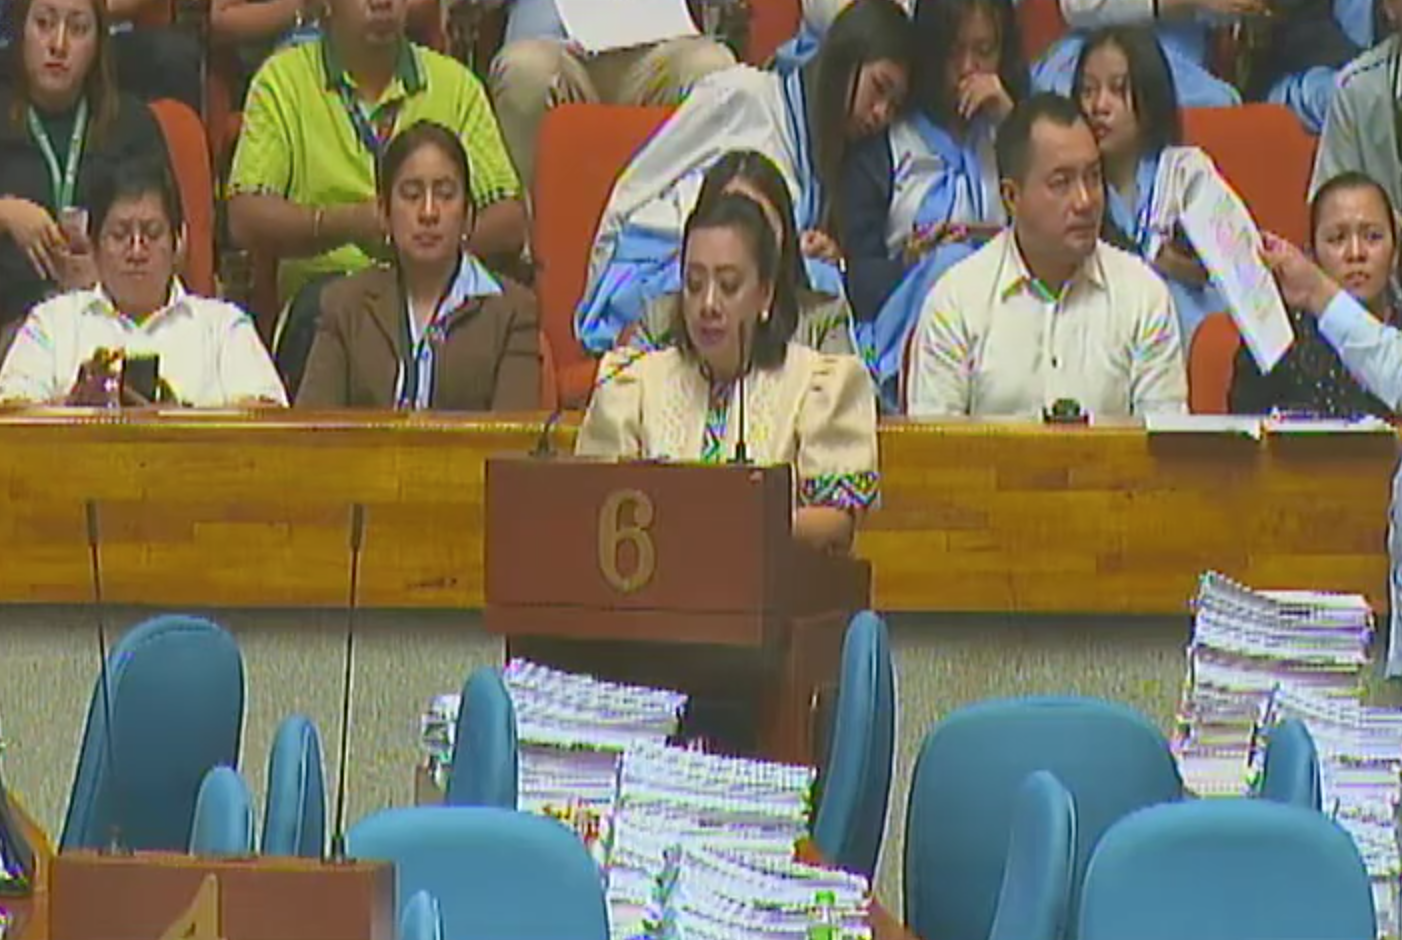 House committee on women and gender equality chair Ma. Lourdes Acosta Alba. Screenshot from House of Representatives' Youtube account 